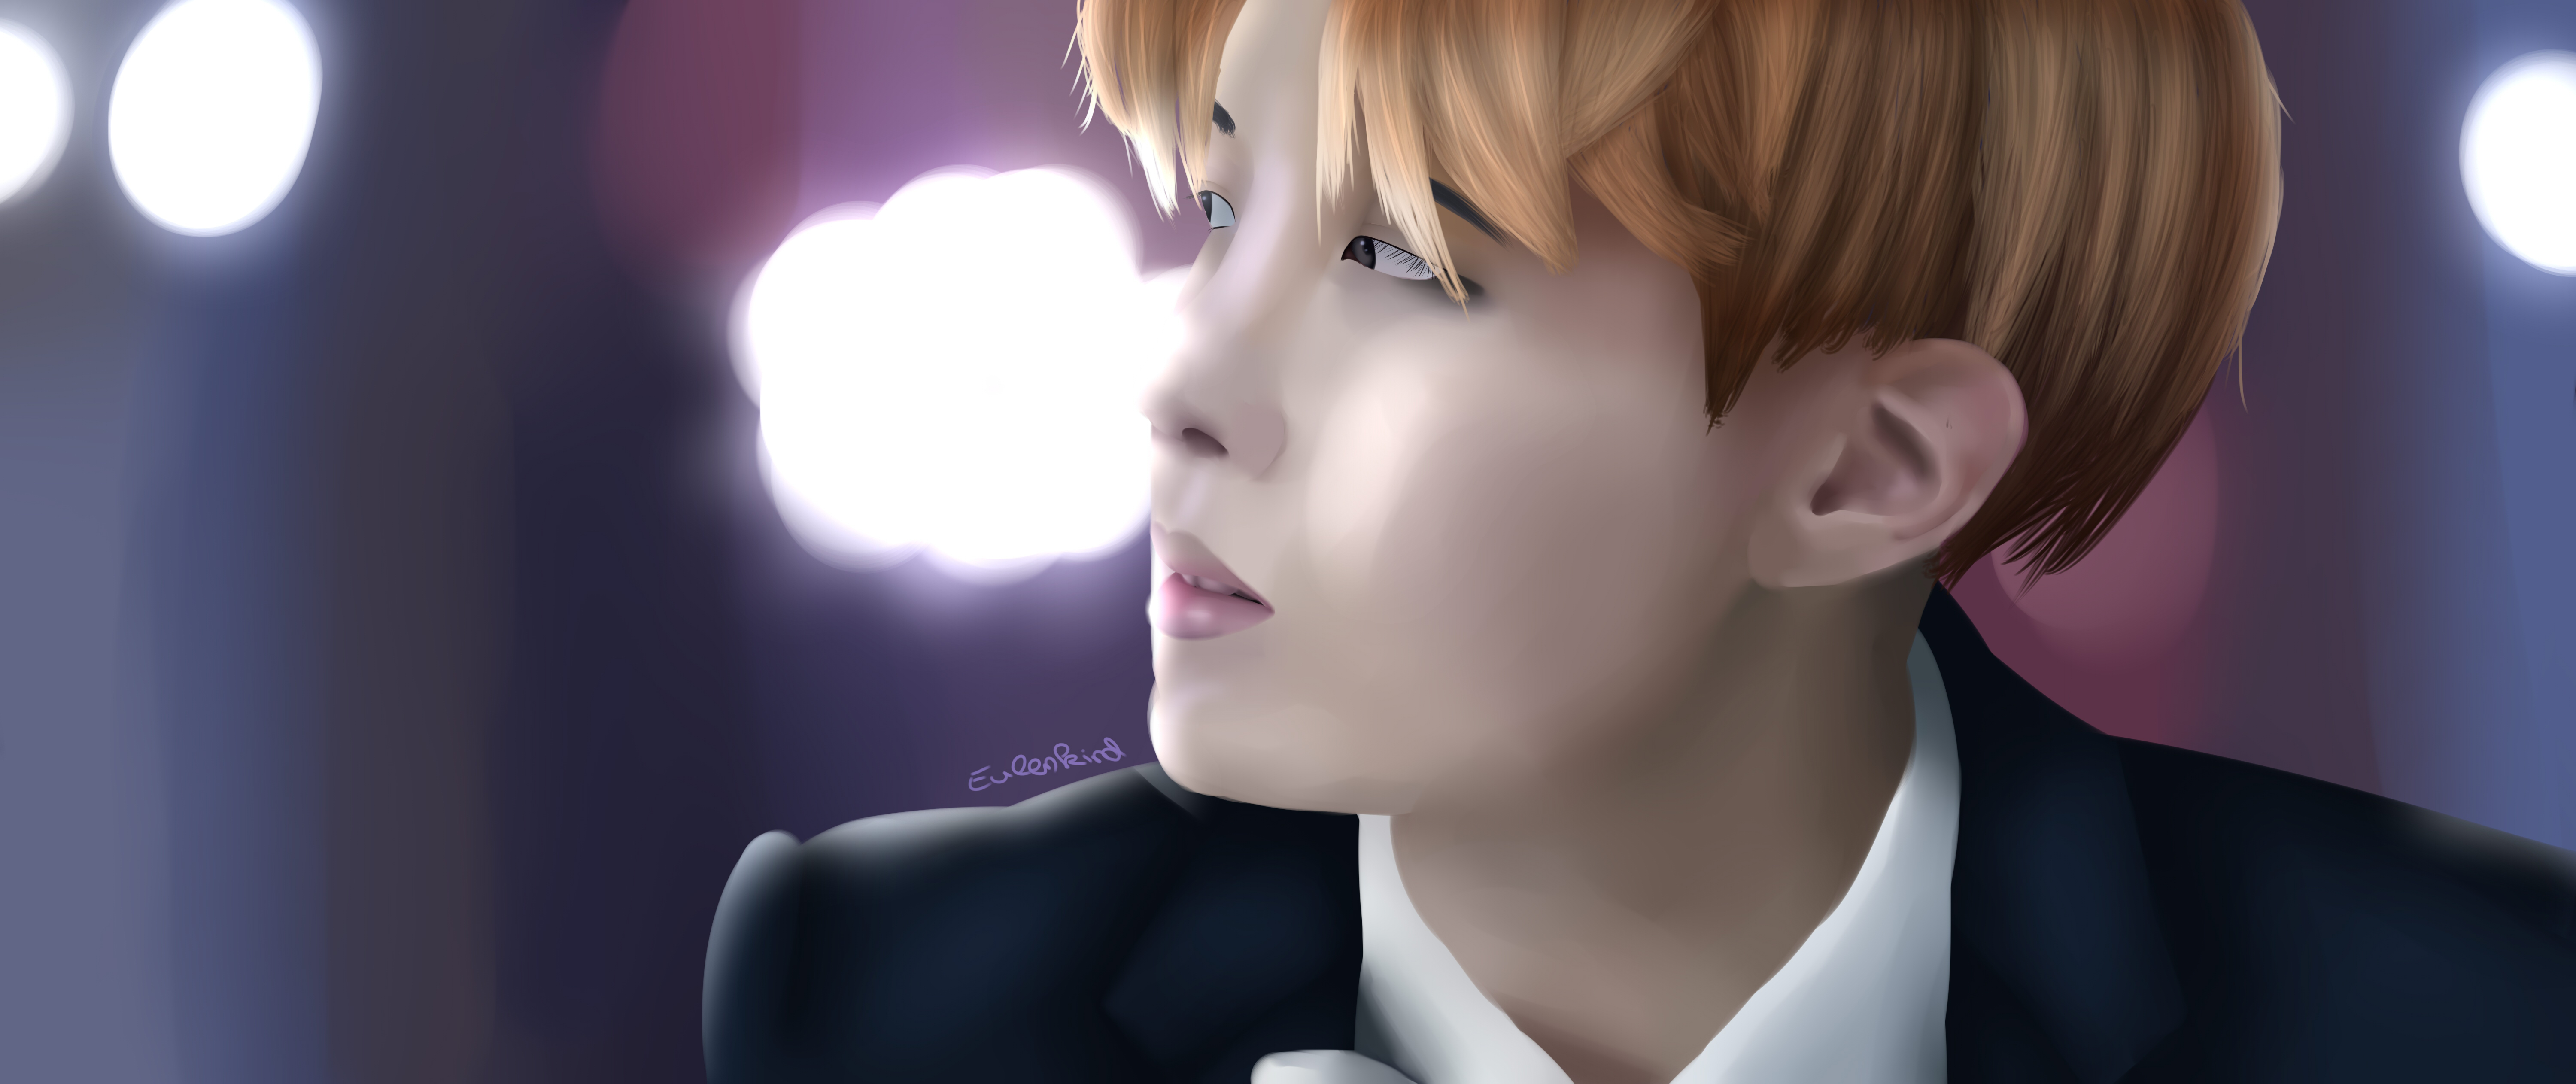 Bts J Hope Blood Sweat And Tears By Xeulenkind On